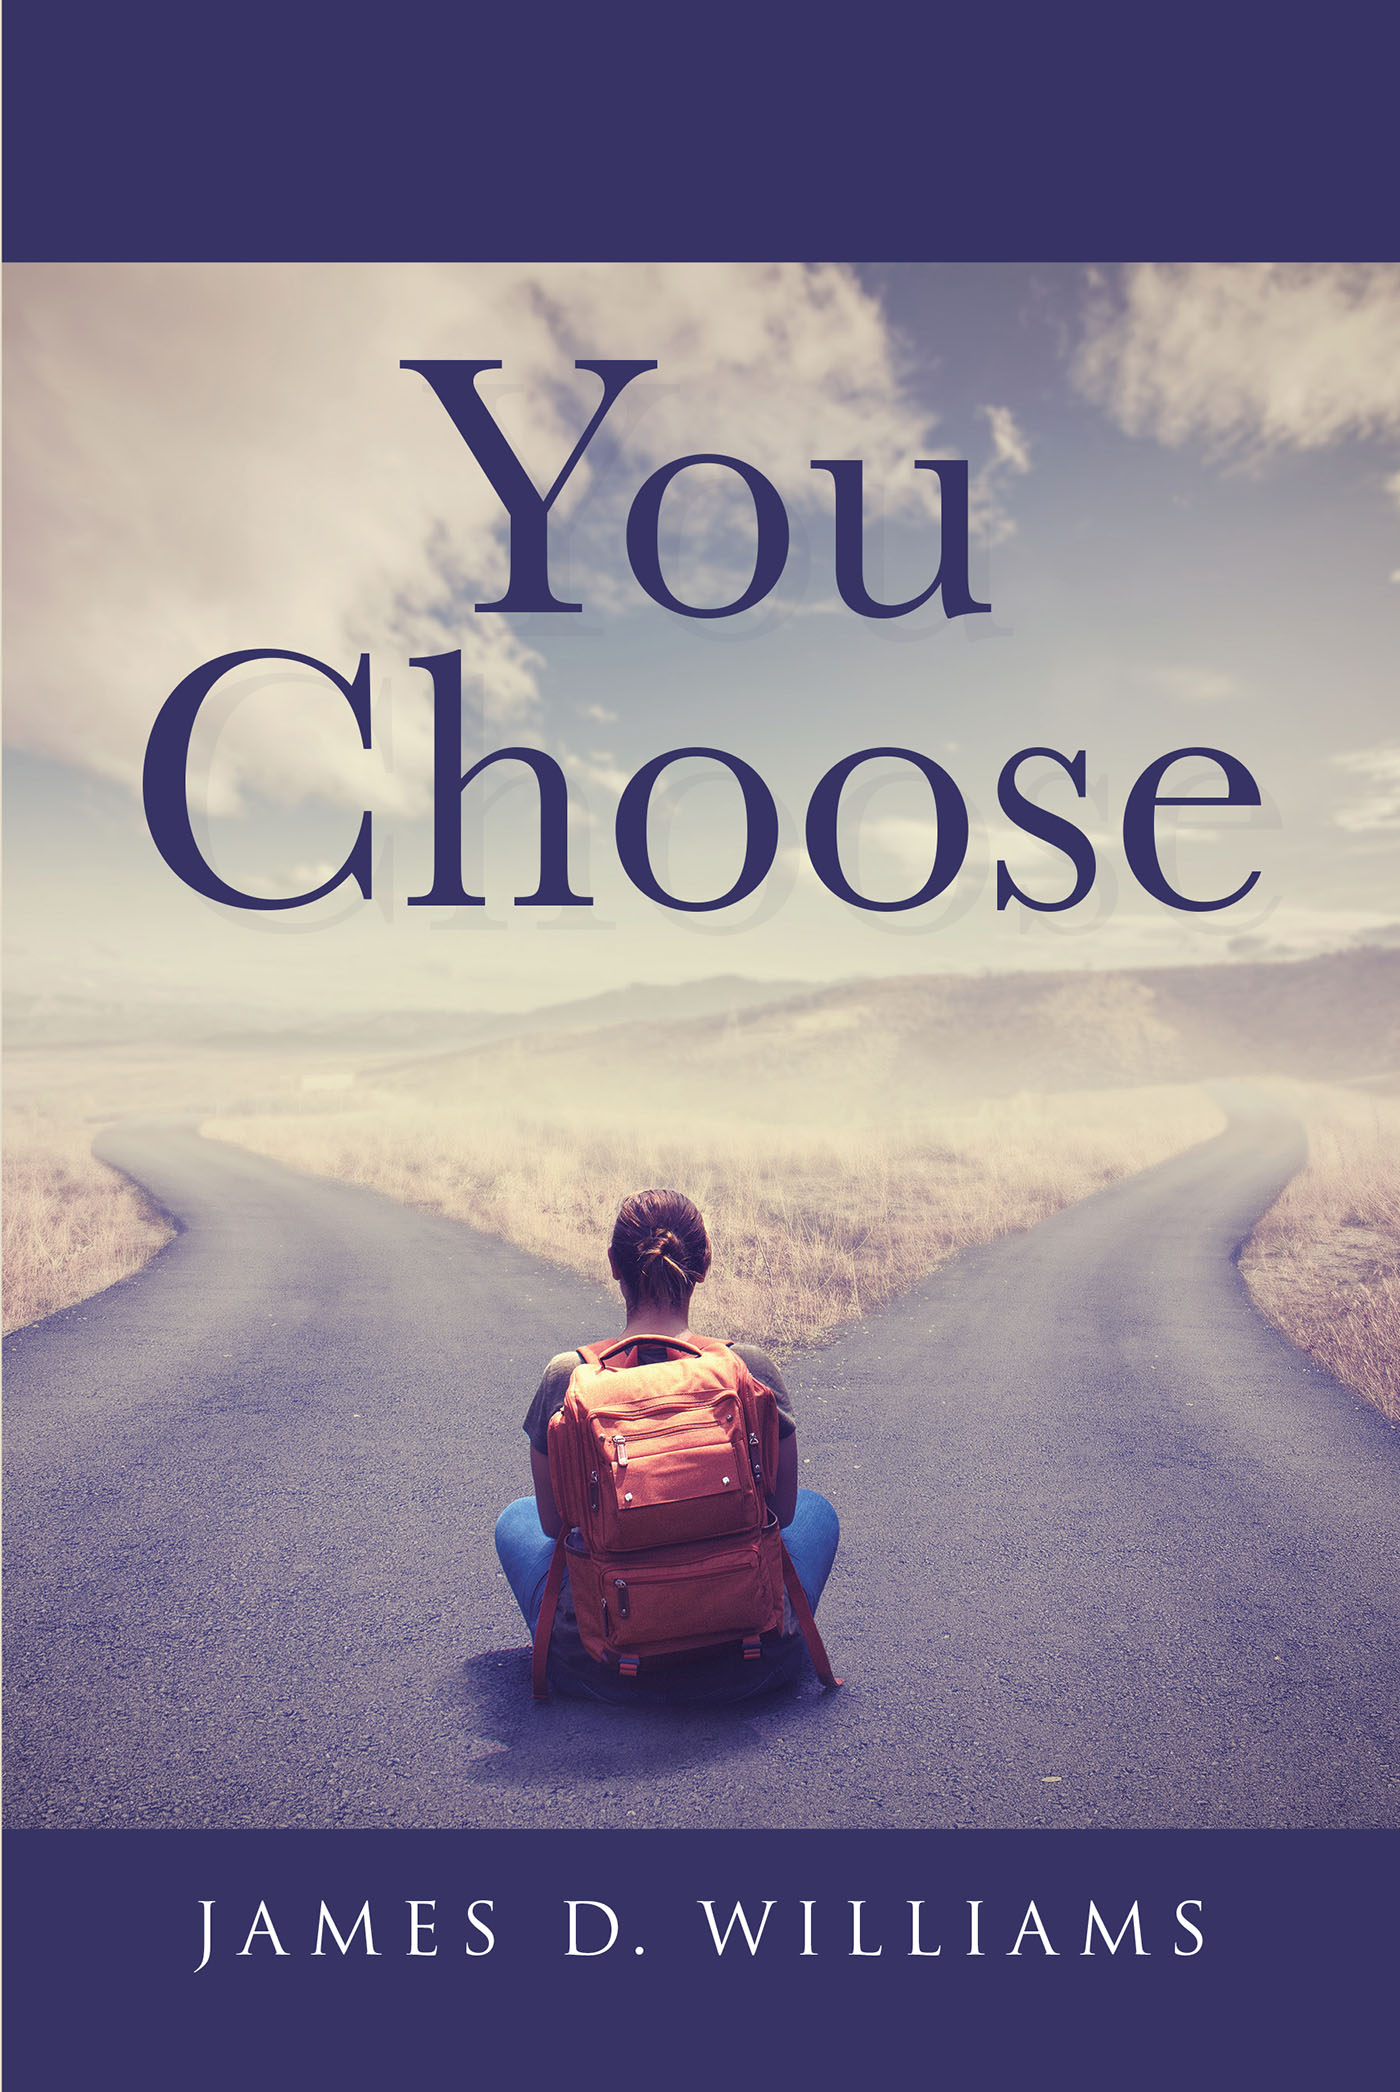 Author James D. Williams’s New Book, "You Choose," is an Eye-Opening Discussion of How Every Person Has a Choice in Life to Either Follow God or Rebuke Him and His Love